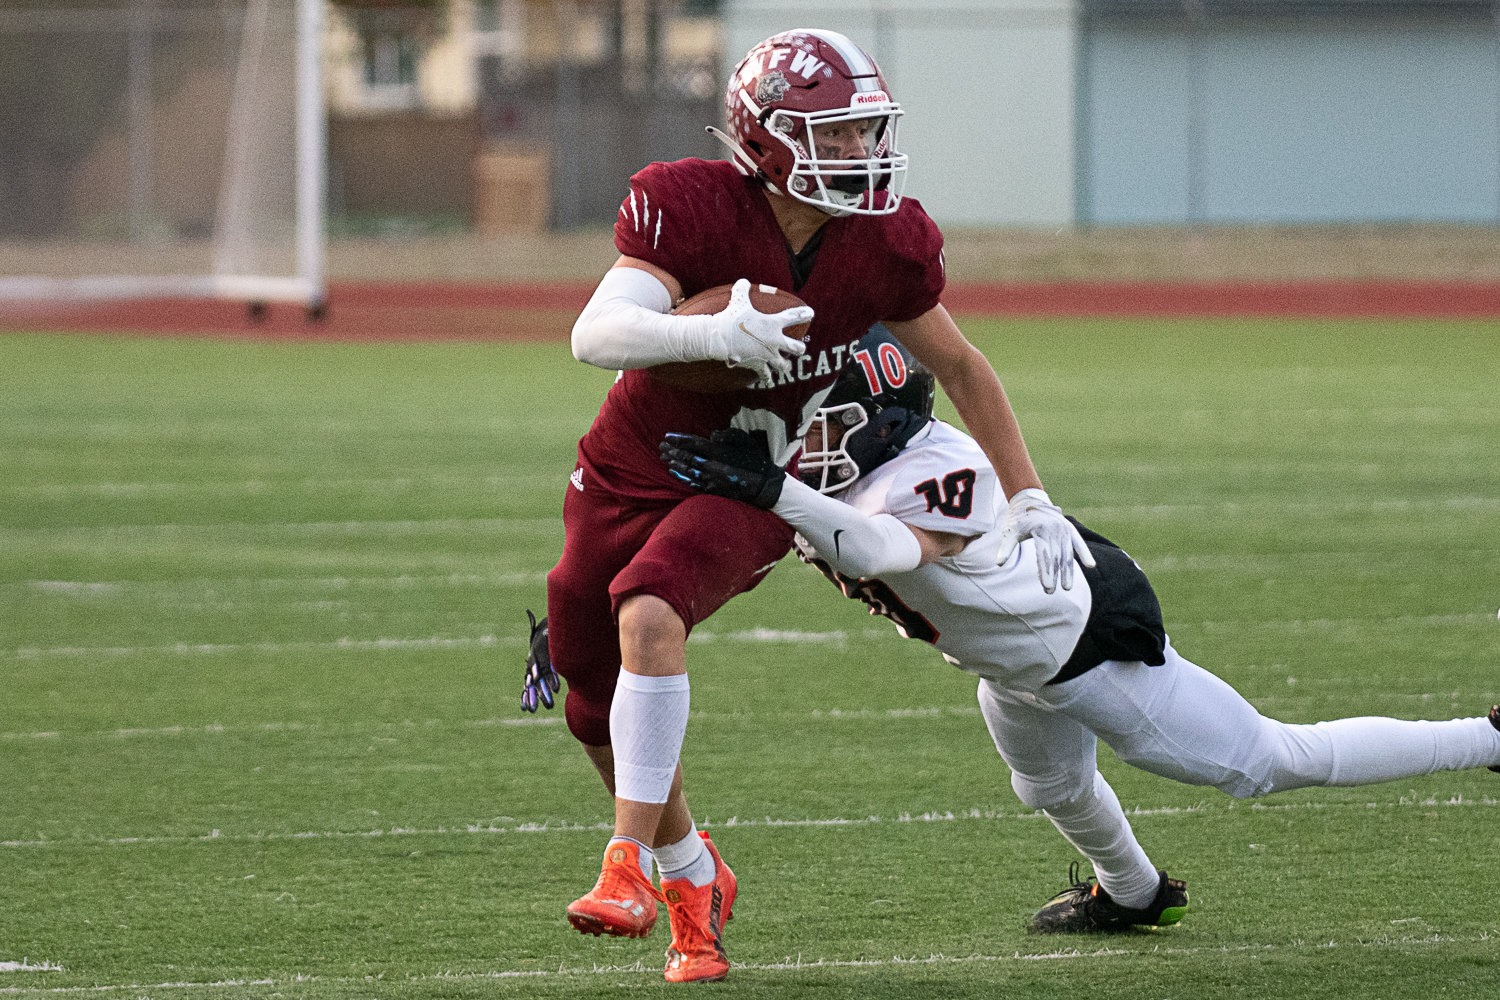 W.F. West receiver Evan Stajduhar breaks a tackle against Ephrata Nov. 11 at Centralia Tiger Stadium in the first round of the state playoffs.